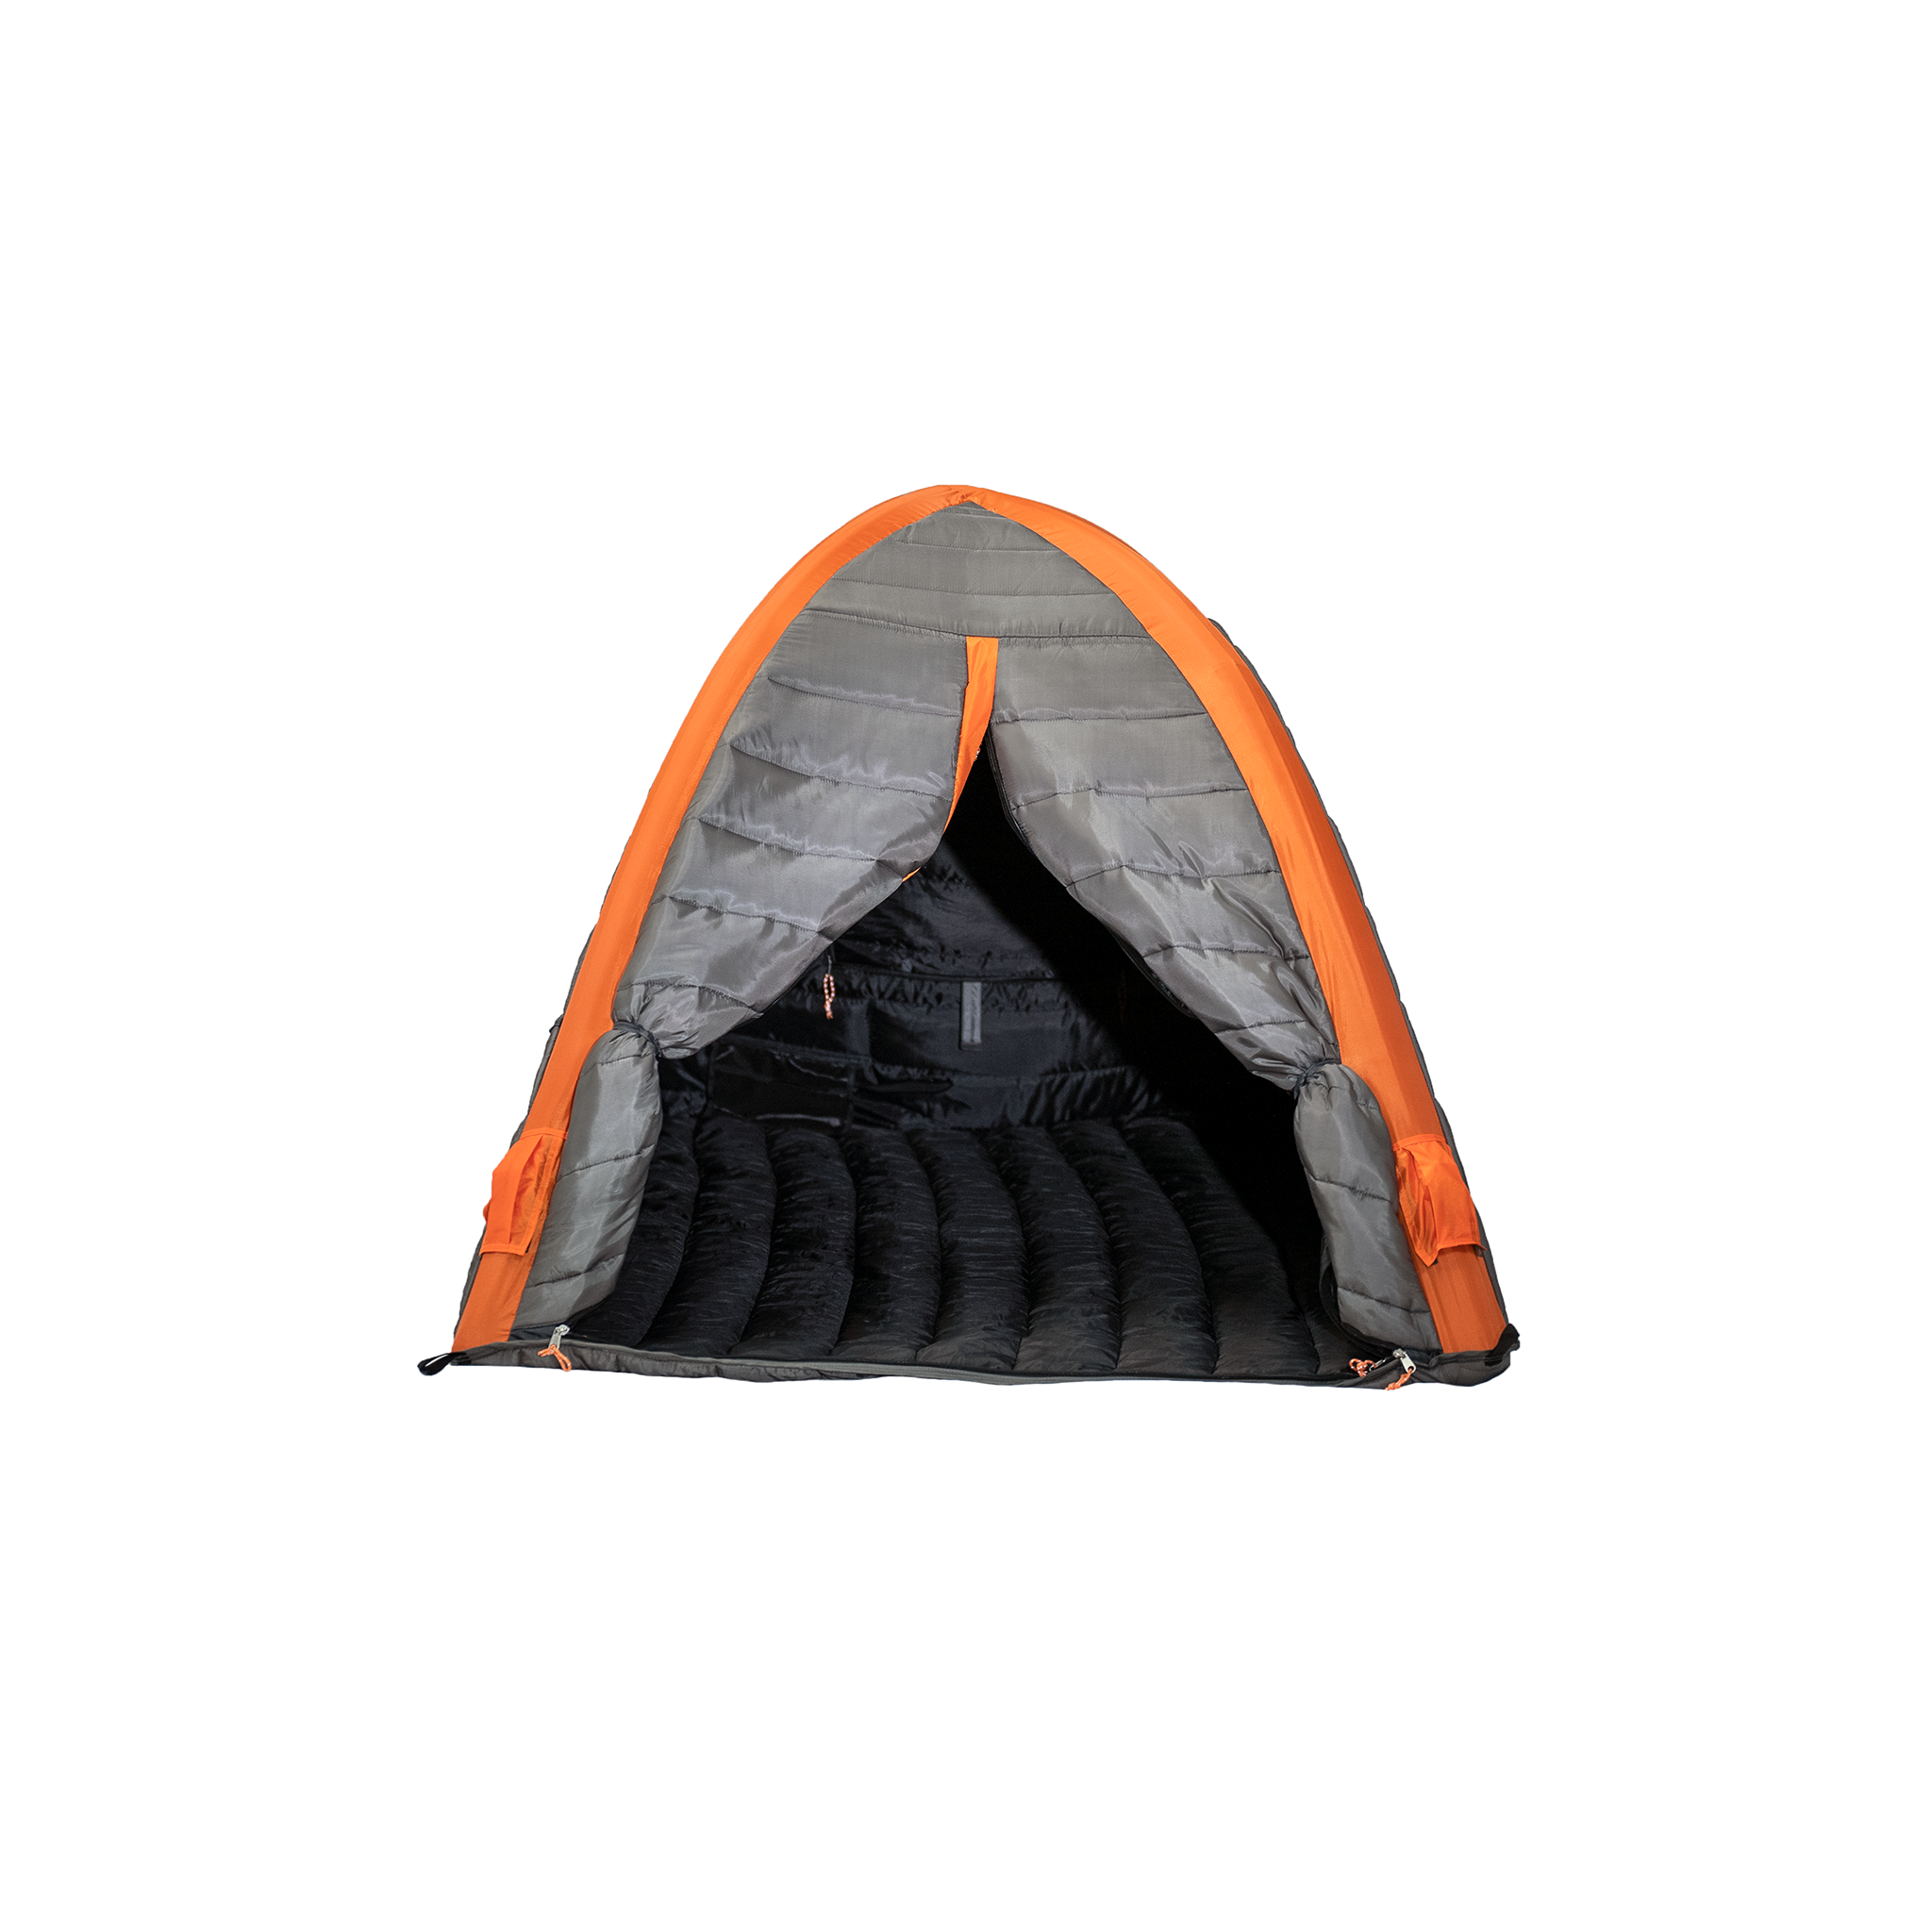 Crua Cocoon 2 Person Insulated Tent - Moosejaw